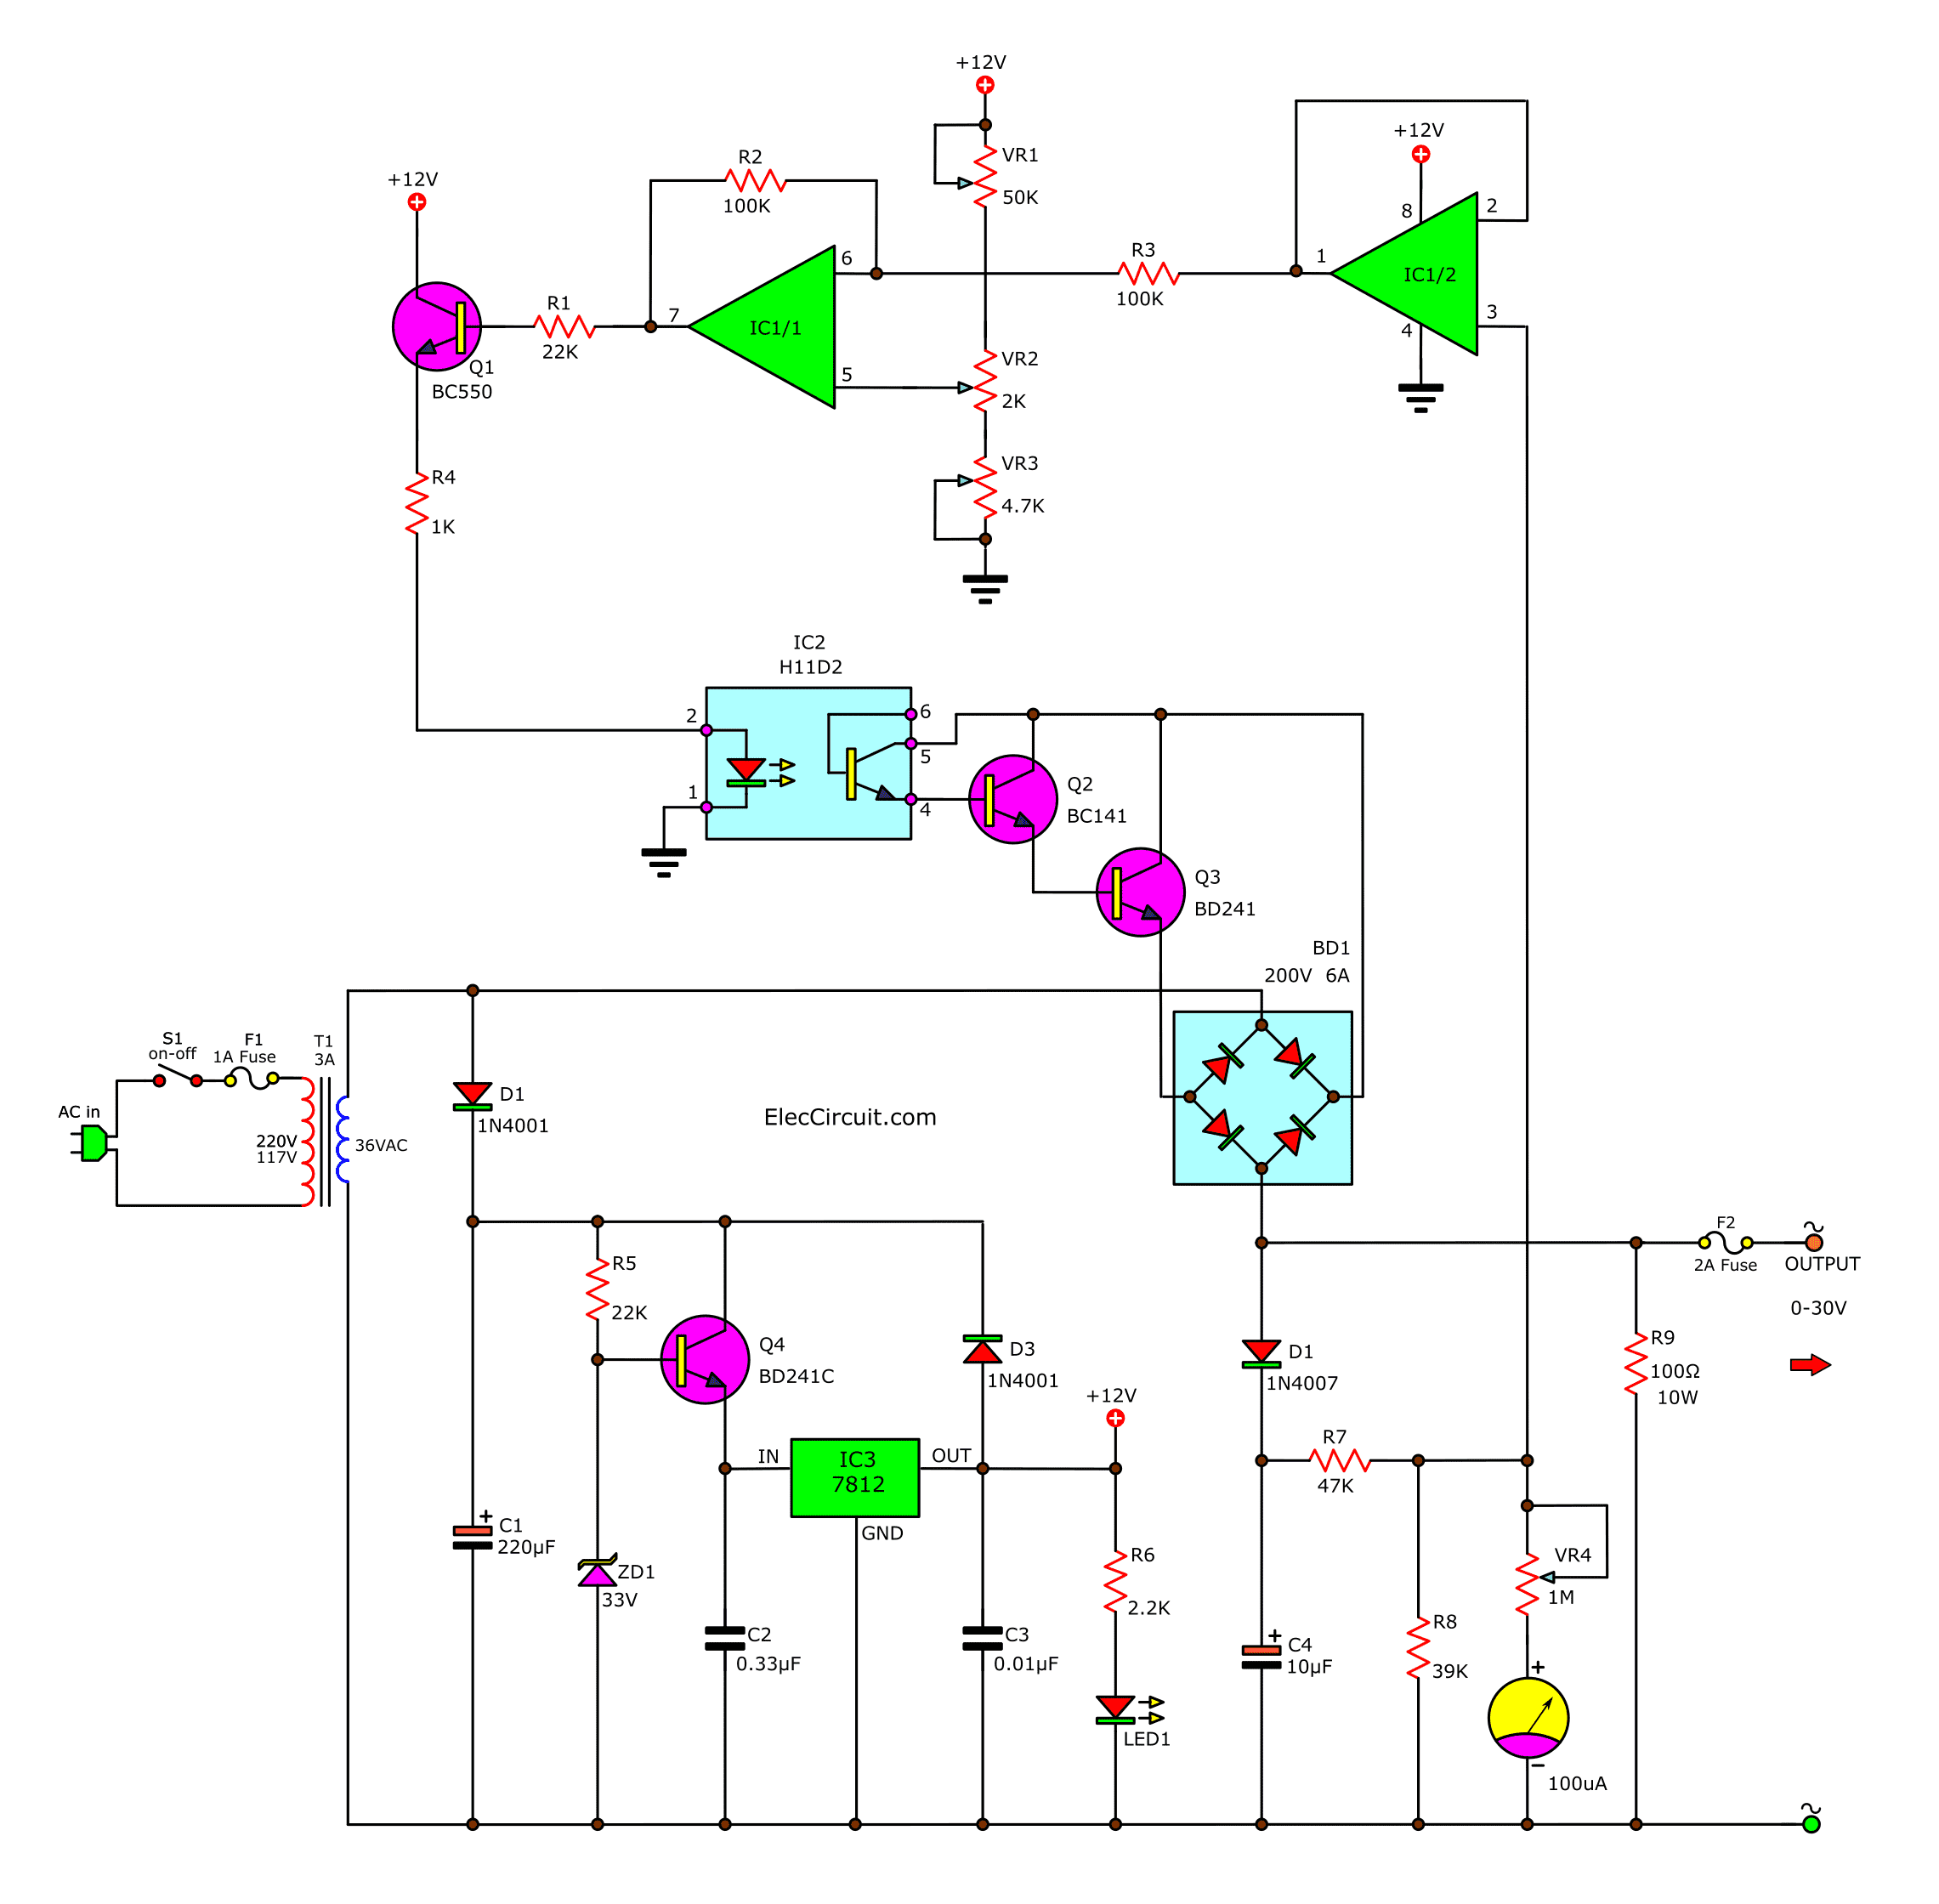 AC Variable Power supply circuit with PCB, 0-30V 3A